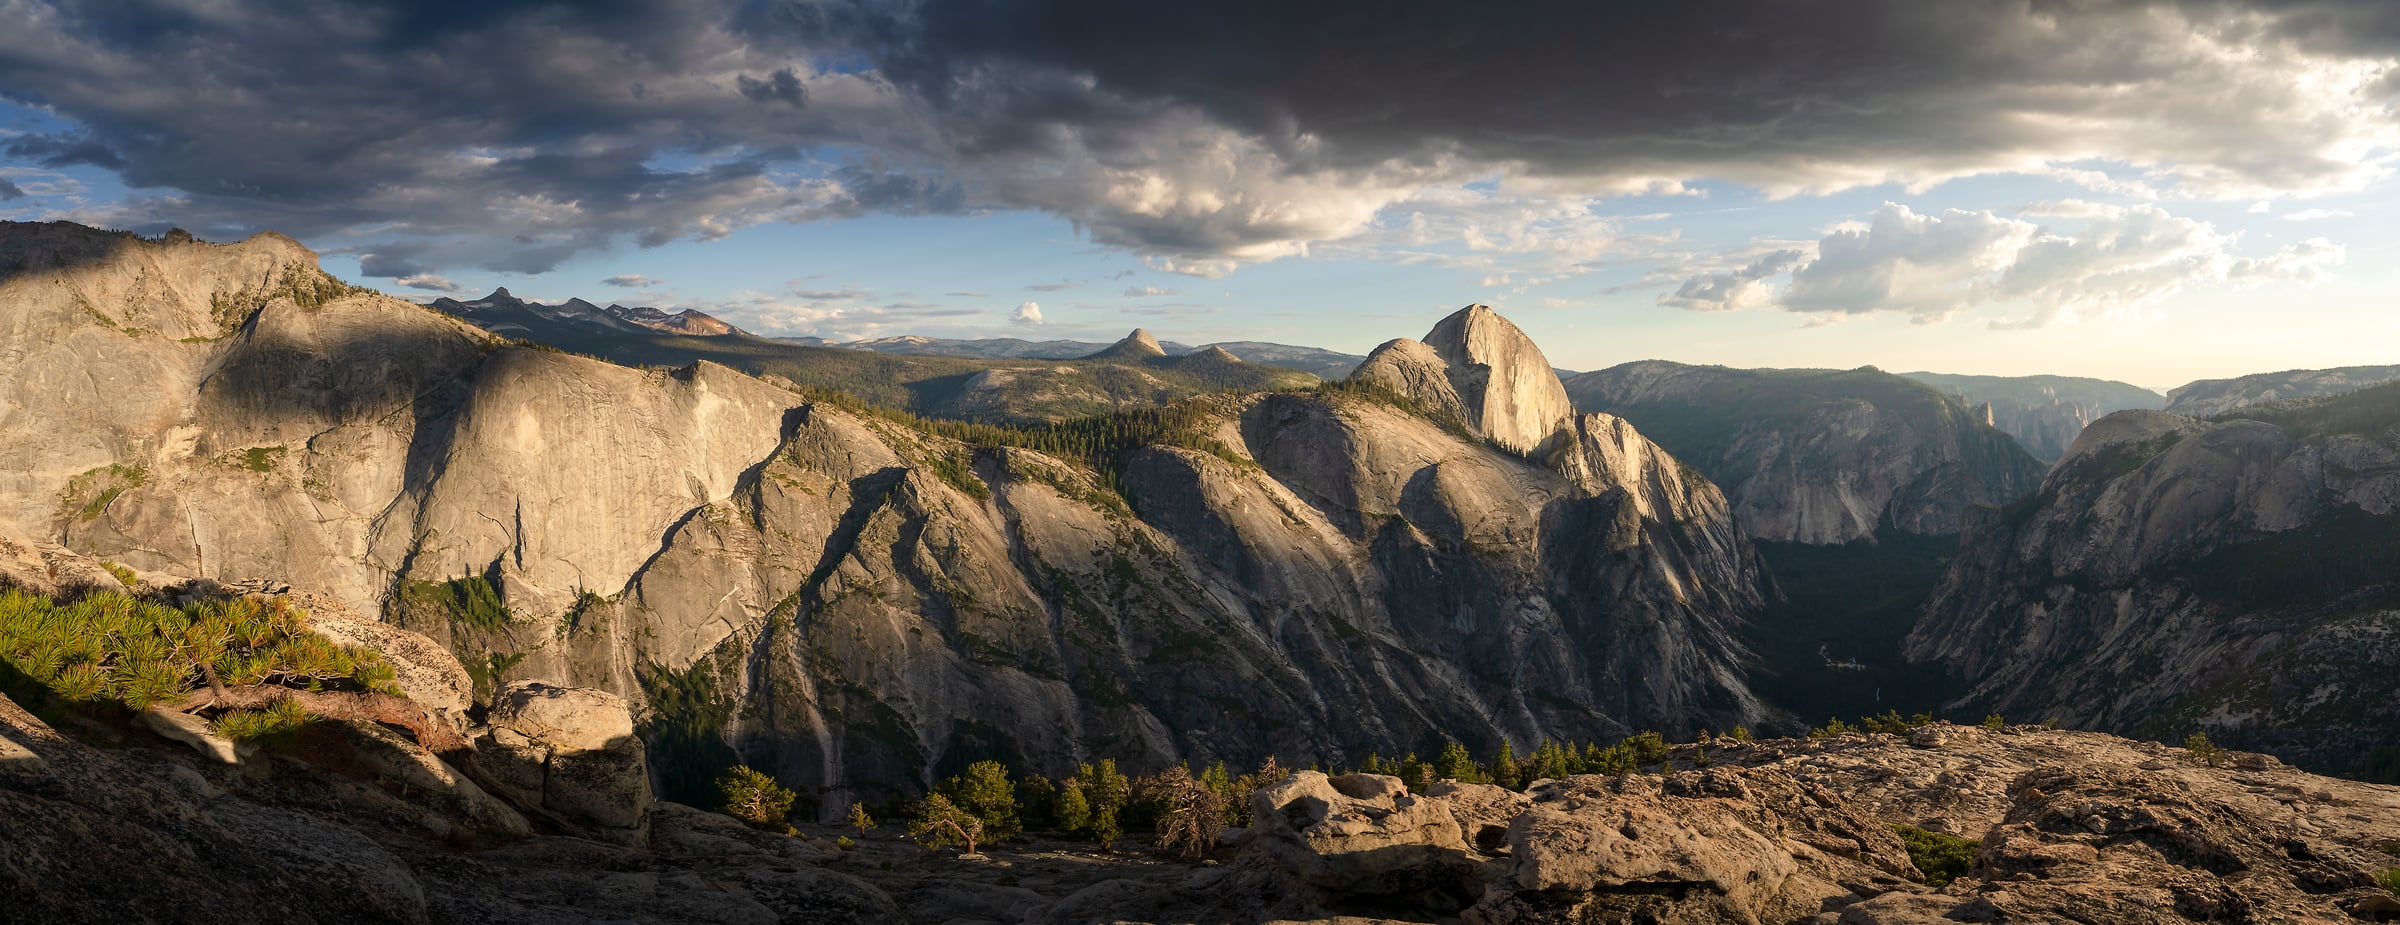 182 megapixels! A very high resolution, large-format VAST photo print of the mountains, rock walls, and cliff faces of Tenaya Canyon and Yosemite Valley at sunset; landscape photograph created by Jeff Lewis in Yosemite National Park, California.